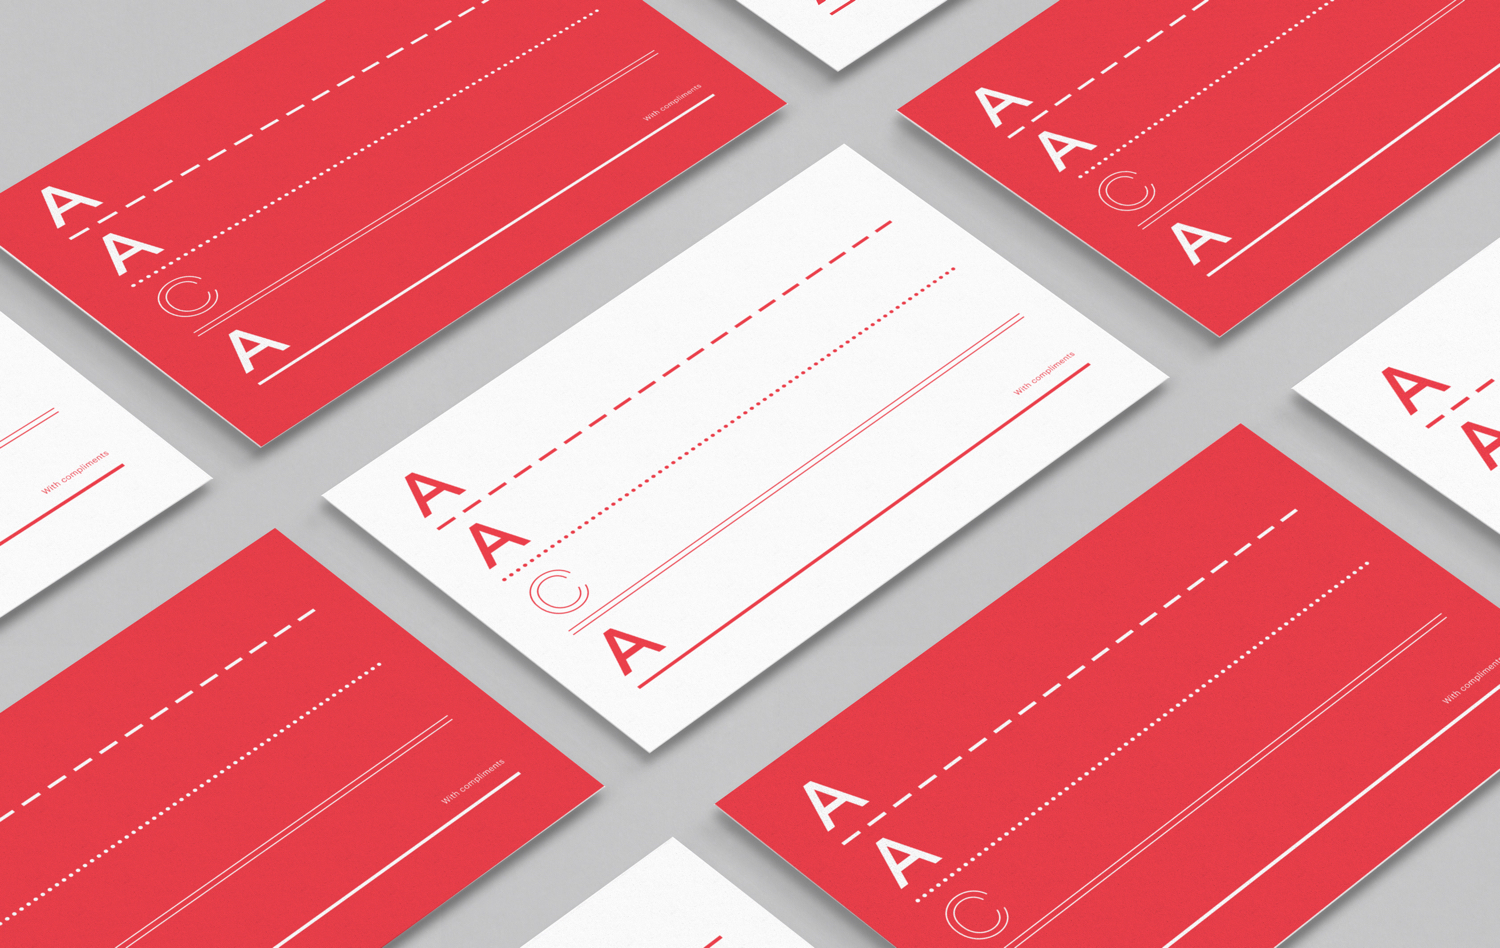 Graphic identity and stationery by Toko for Architects Accreditation Council Of Australia